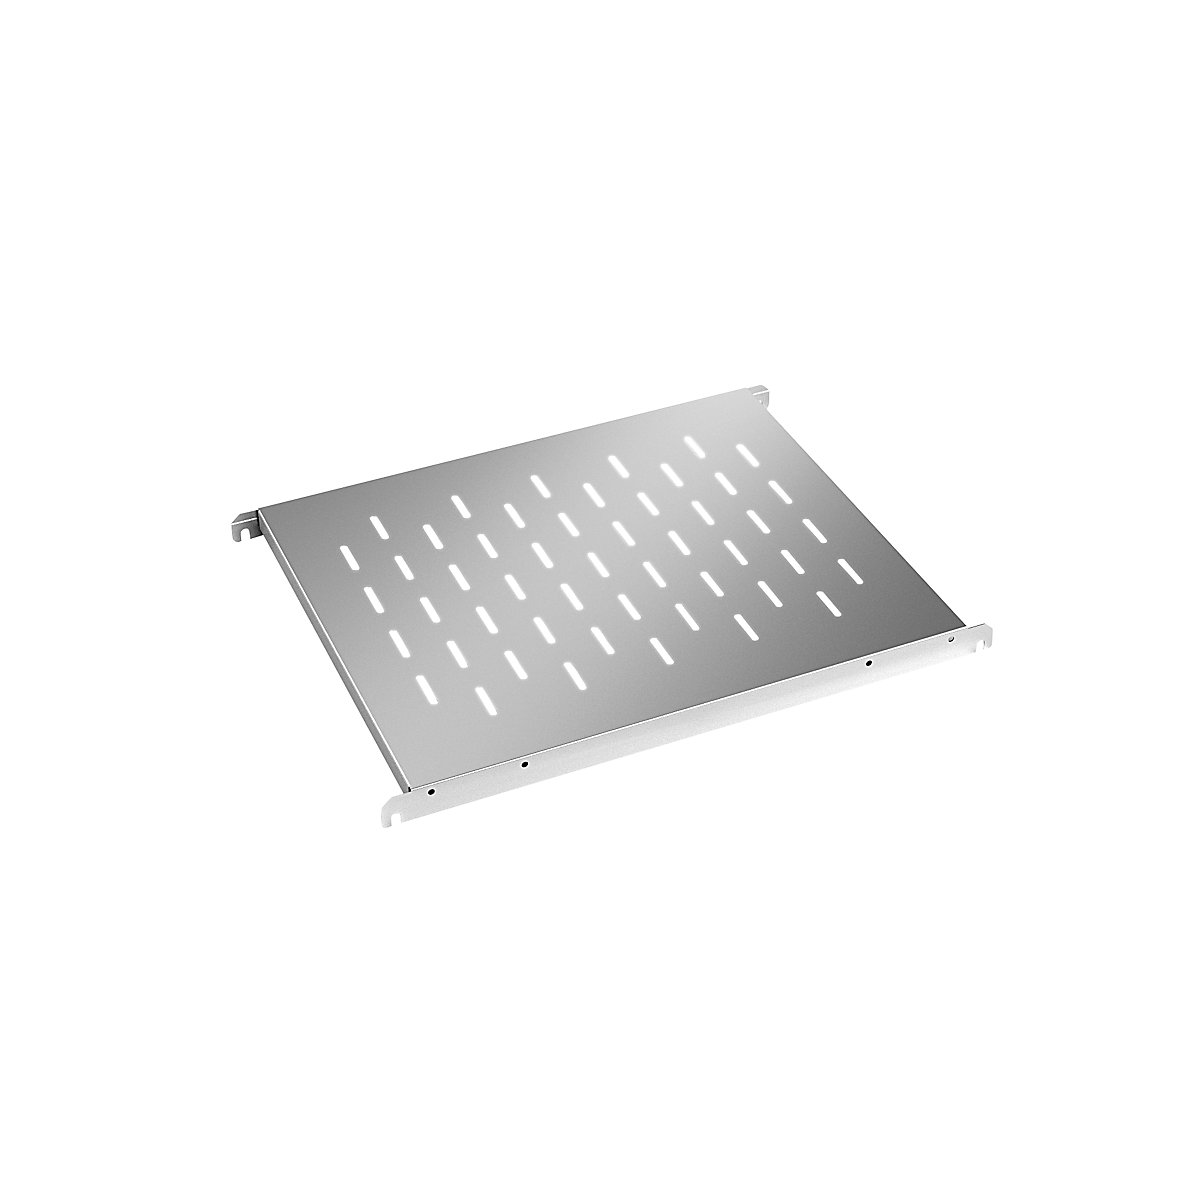 Stainless steel shelf, perforated, WxD 640 x 540 mm